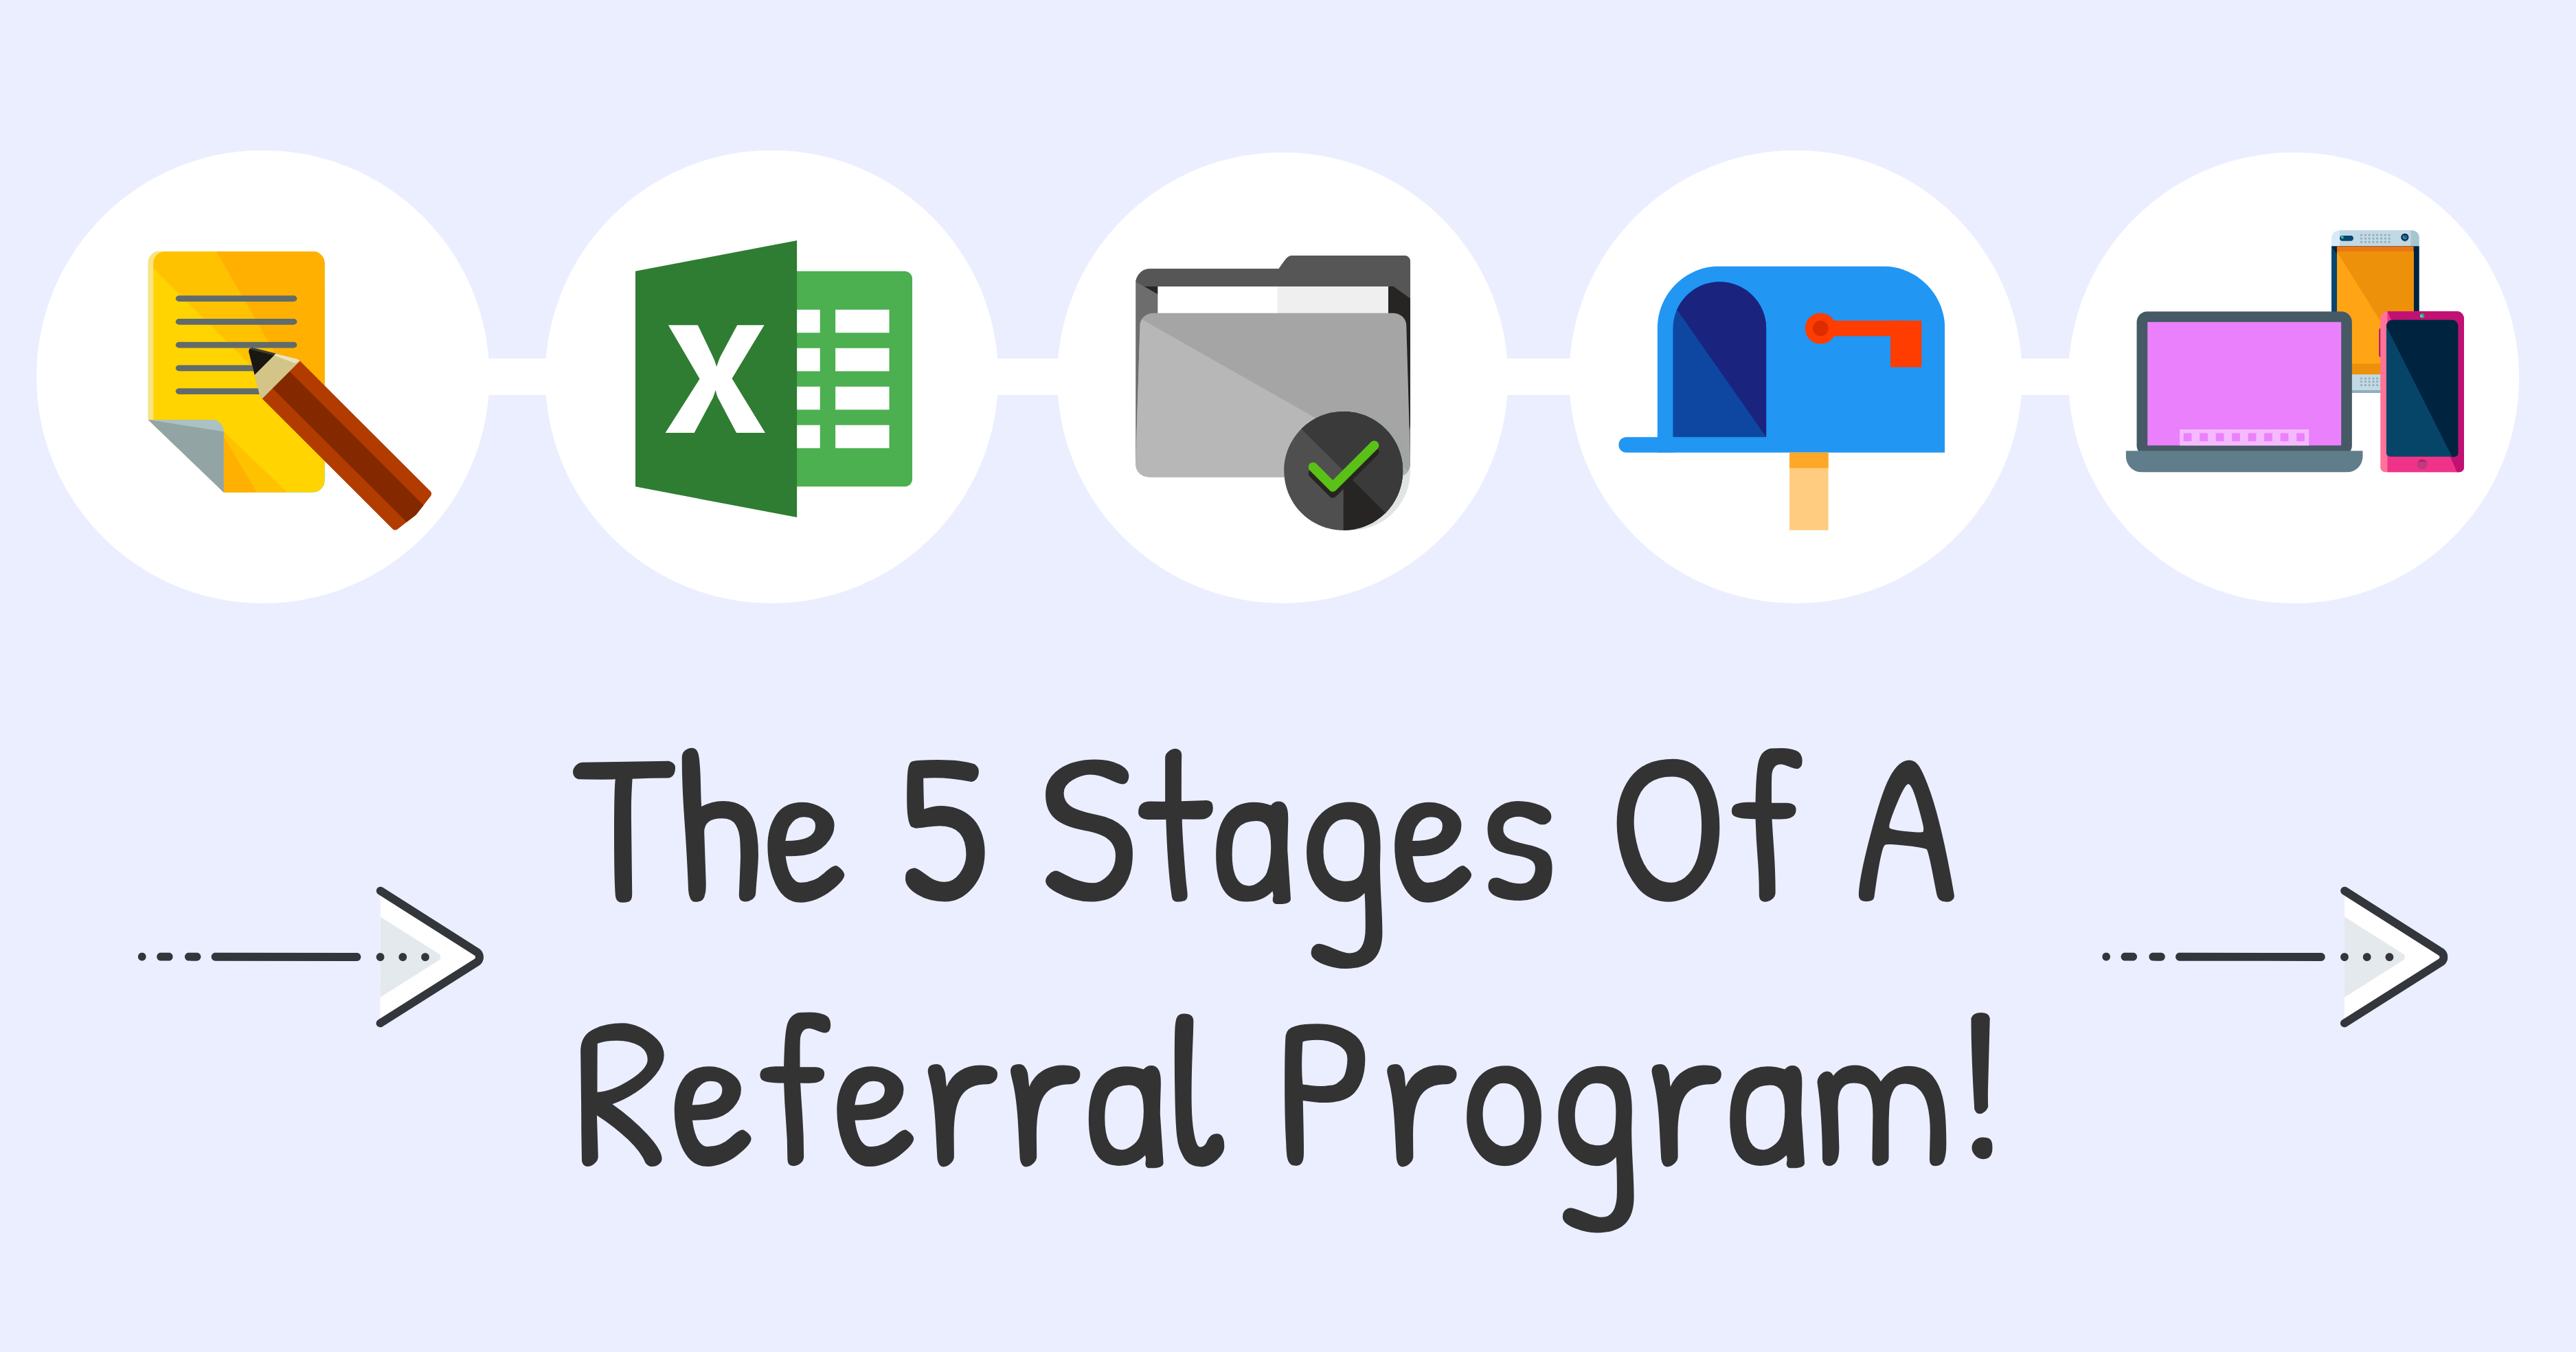 The 5 Stages Of A Referral Program!